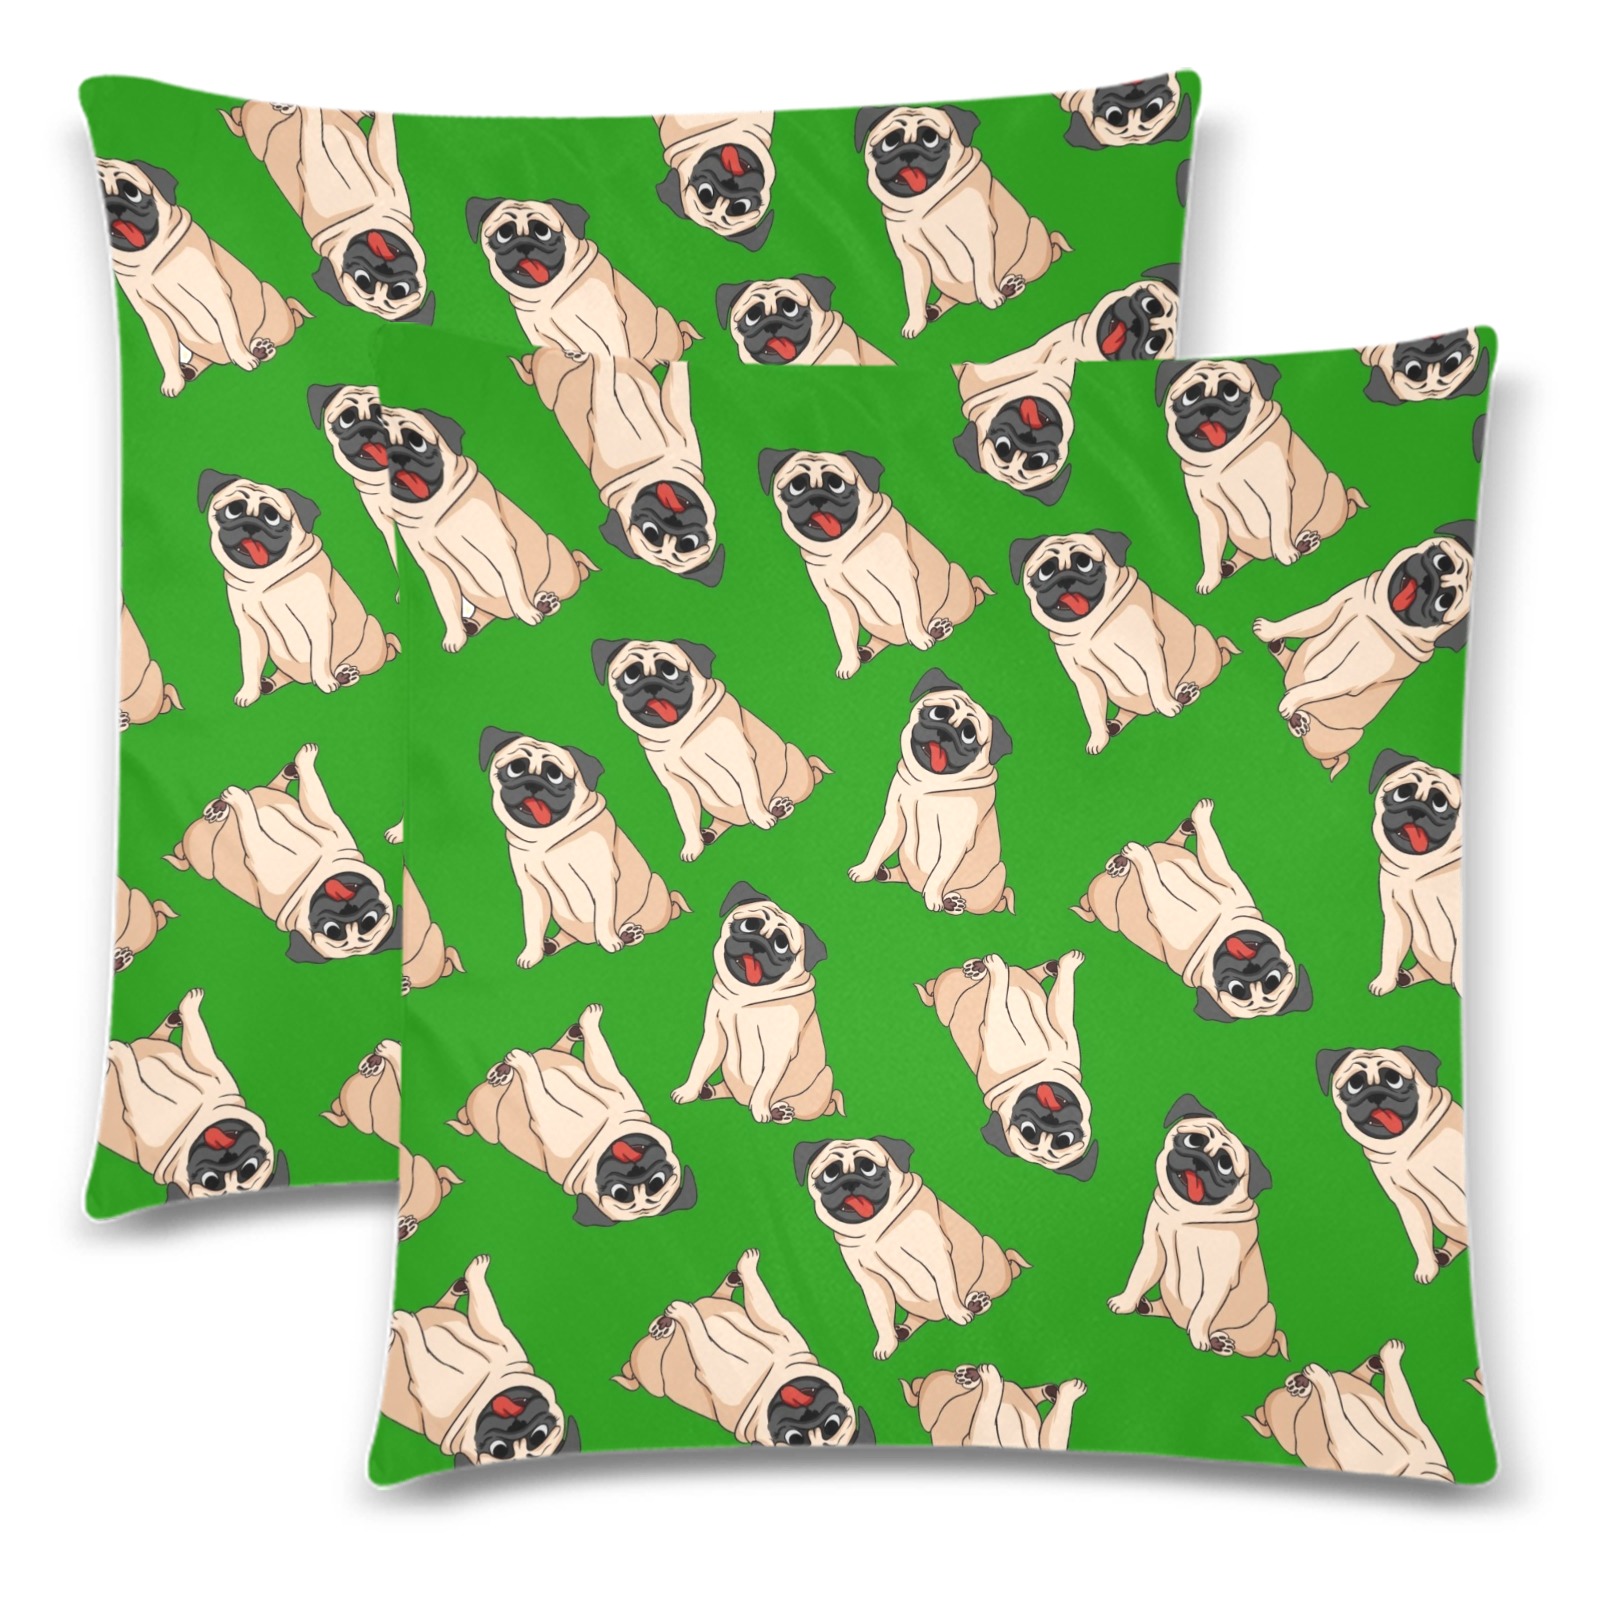 Pugs on Green Custom Zippered Pillow Cases 18"x 18" (Twin Sides) (Set of 2)